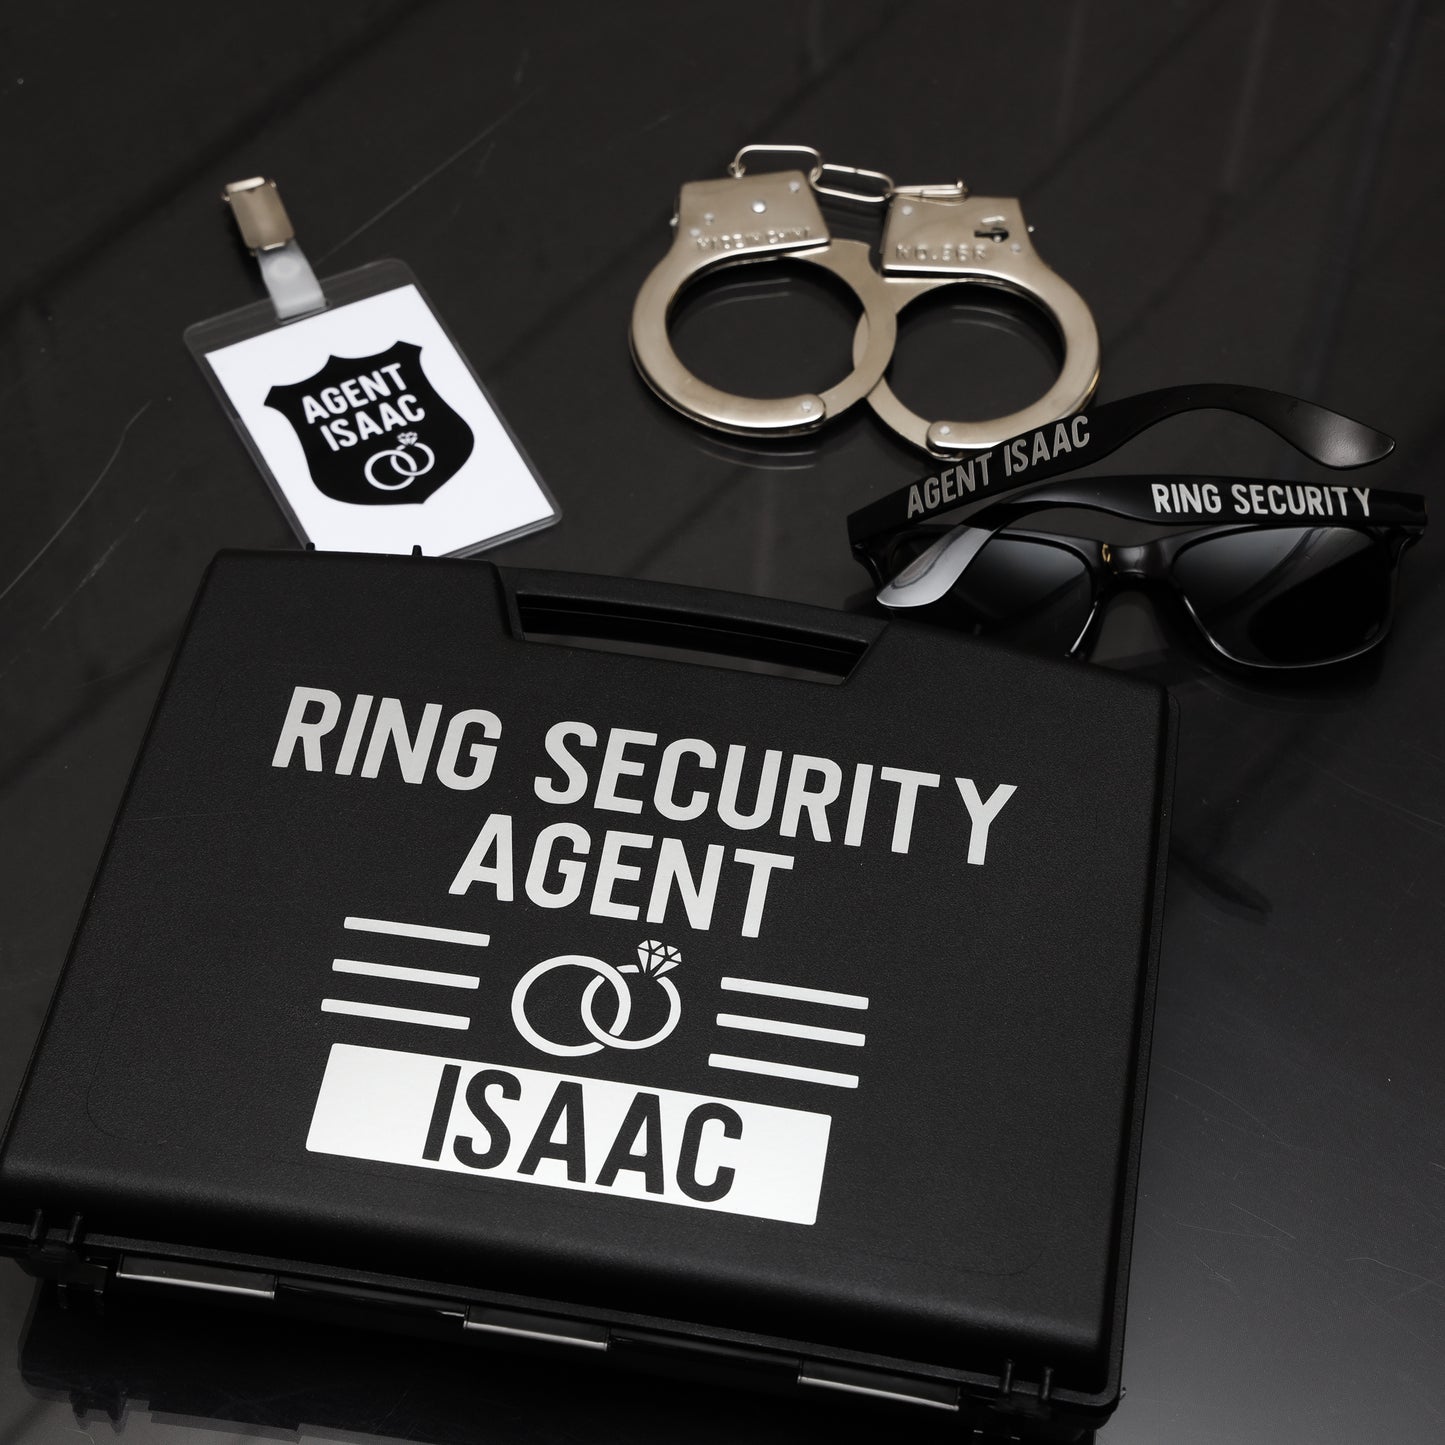 Personalised Pageboy Ring Security Box Briefcase  - Always Looking Good - Full set - Briefcase sunglasses badge and handcuffs  